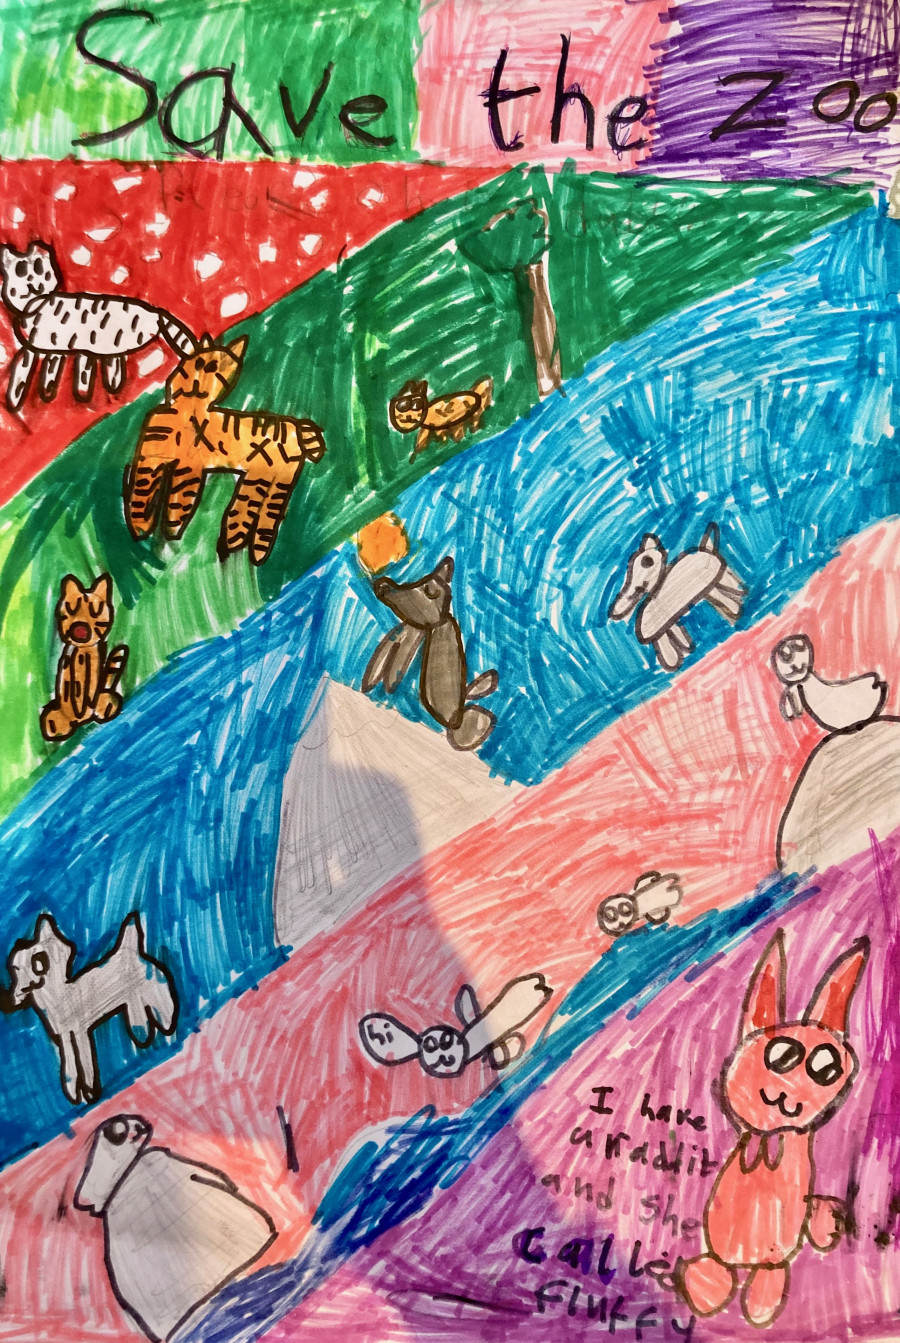 'Help save the zoo' by Grace (9) from Kildare